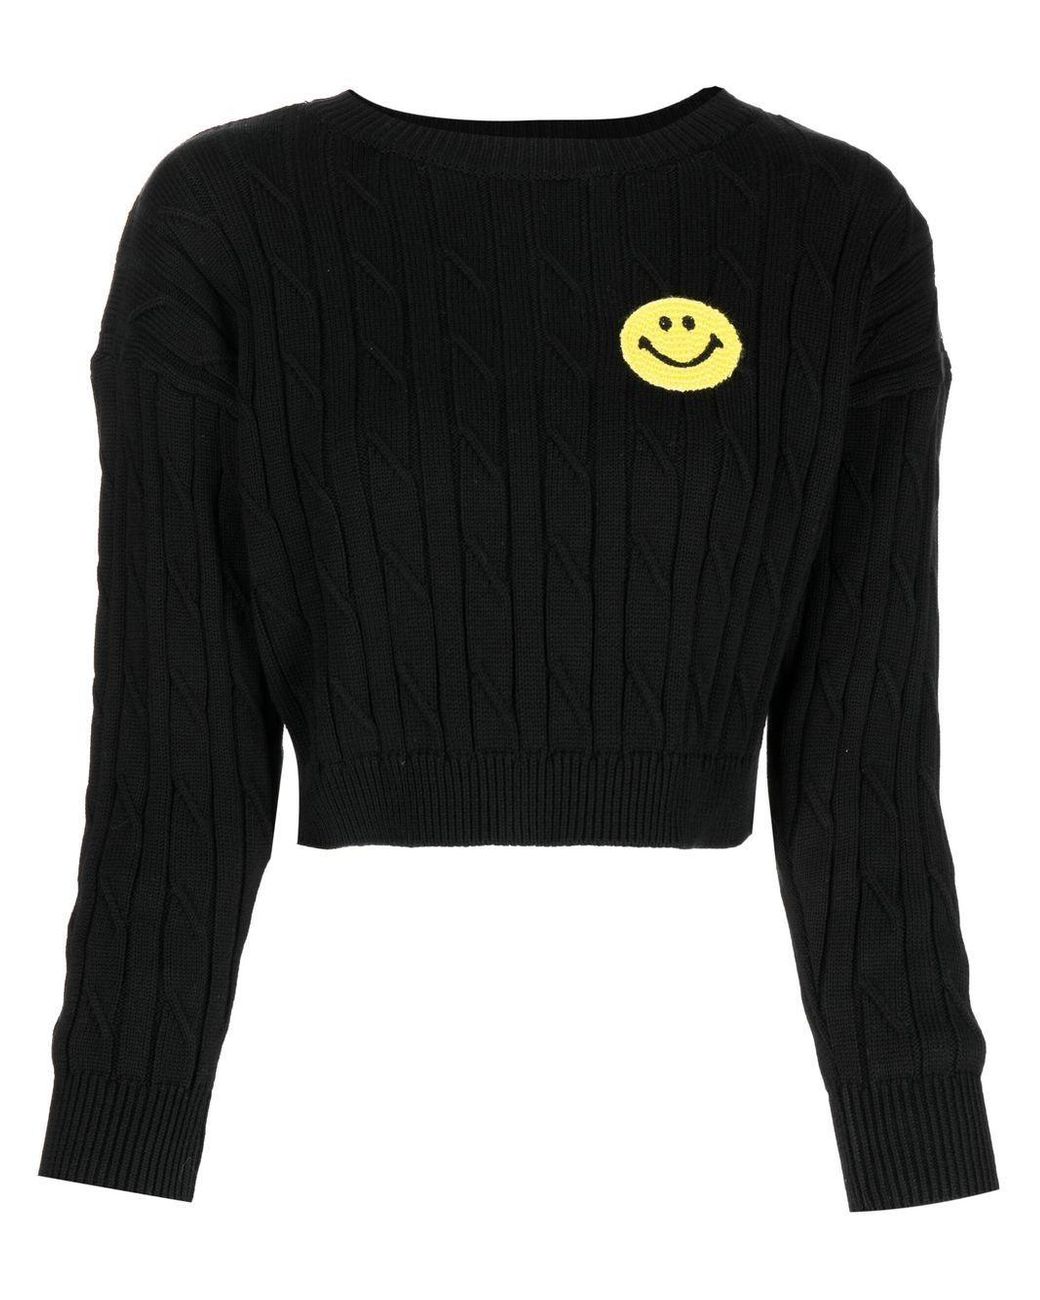 Joshua Sanders Smiley-face Cable Knit Jumper in Black | Lyst